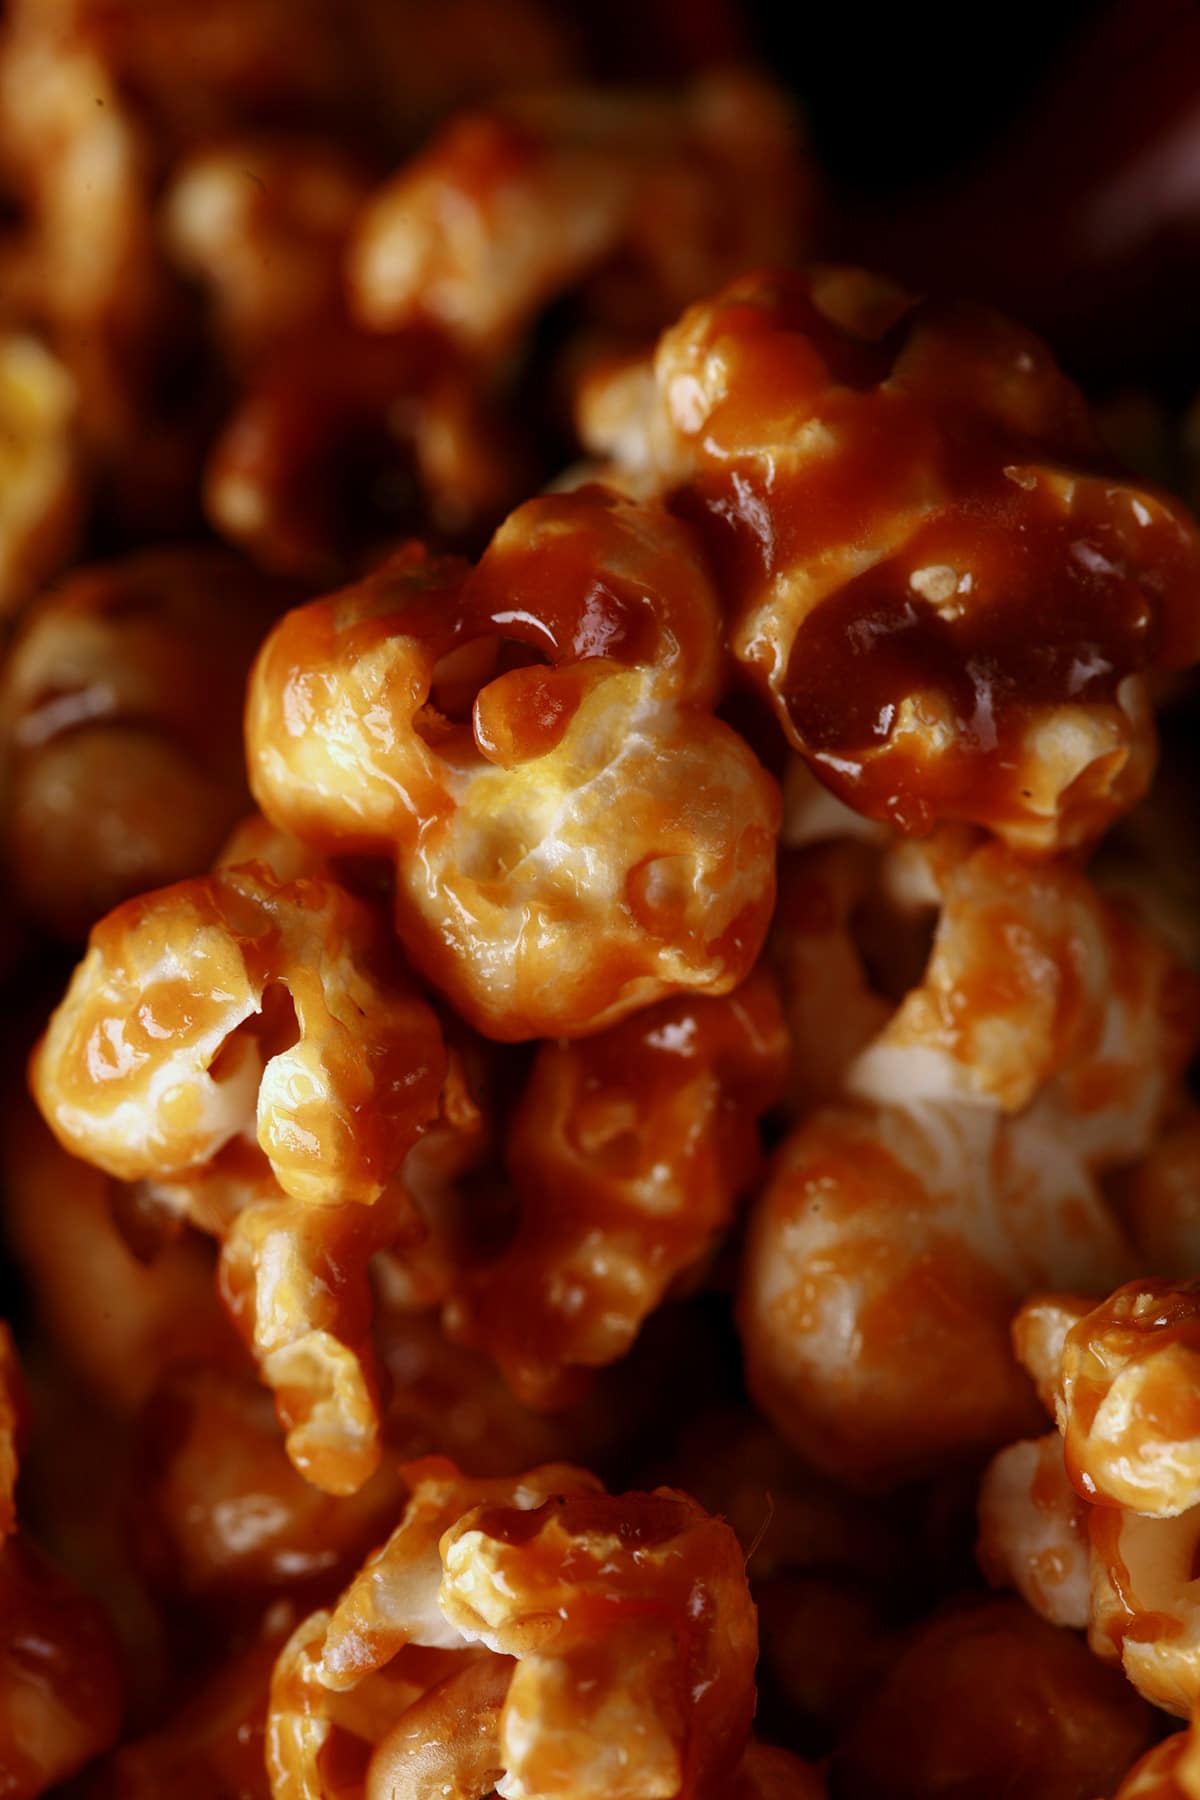 A close up view of maple caramel popcorn.